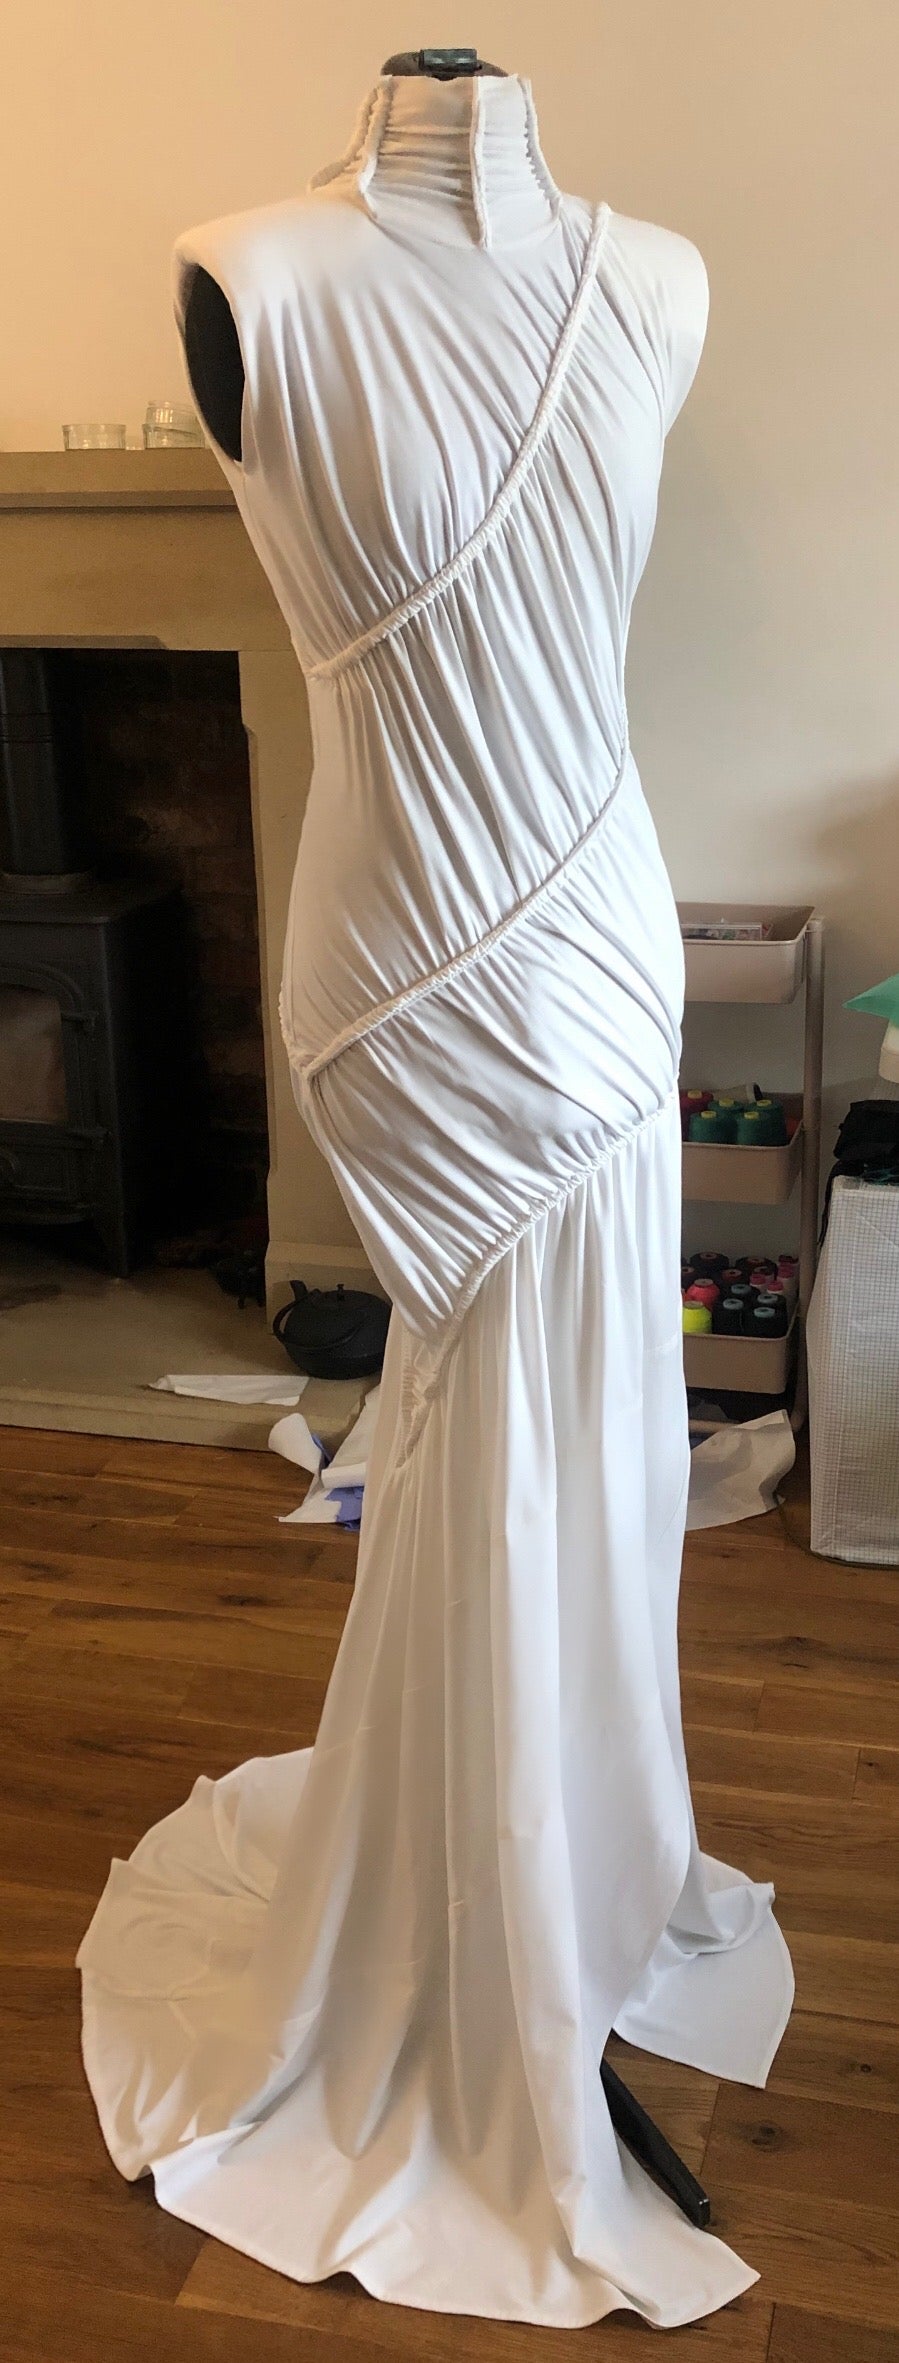 Dress Being Made on Dress Form by Bette Jo Chudy - White [BJC 101